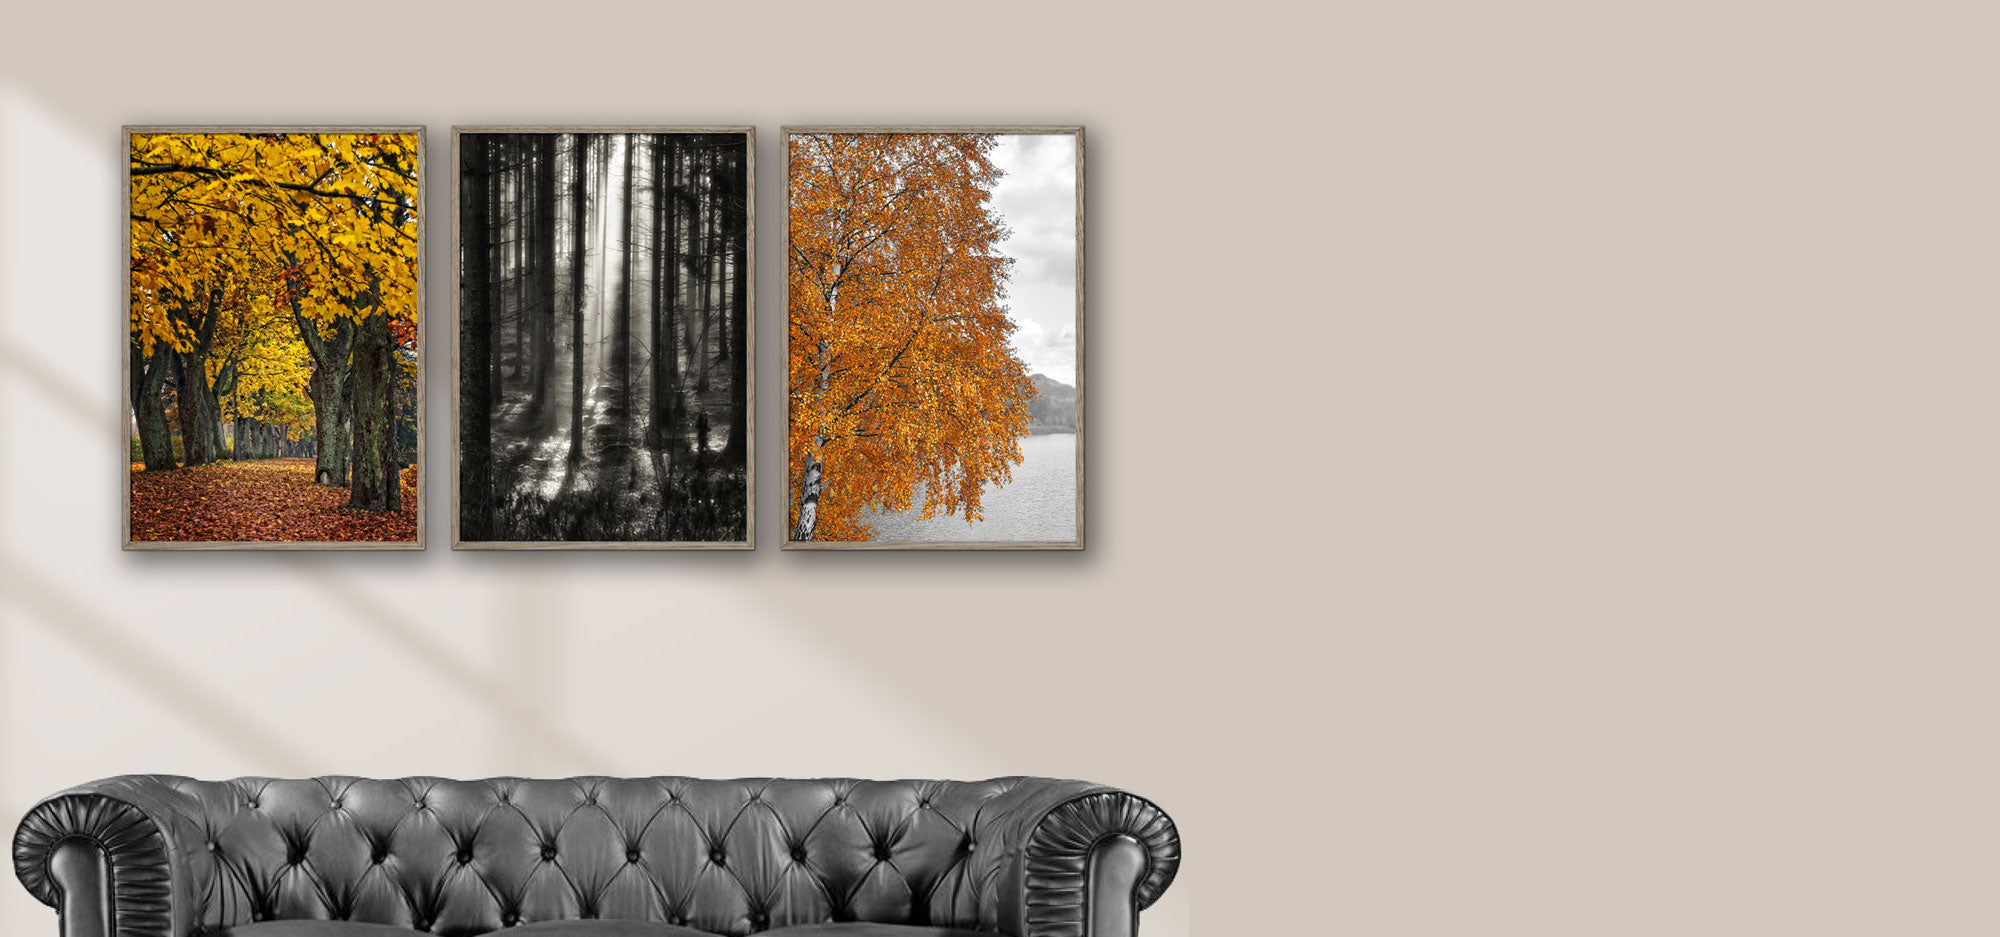 50x70 cm | Store Posters Online Levering